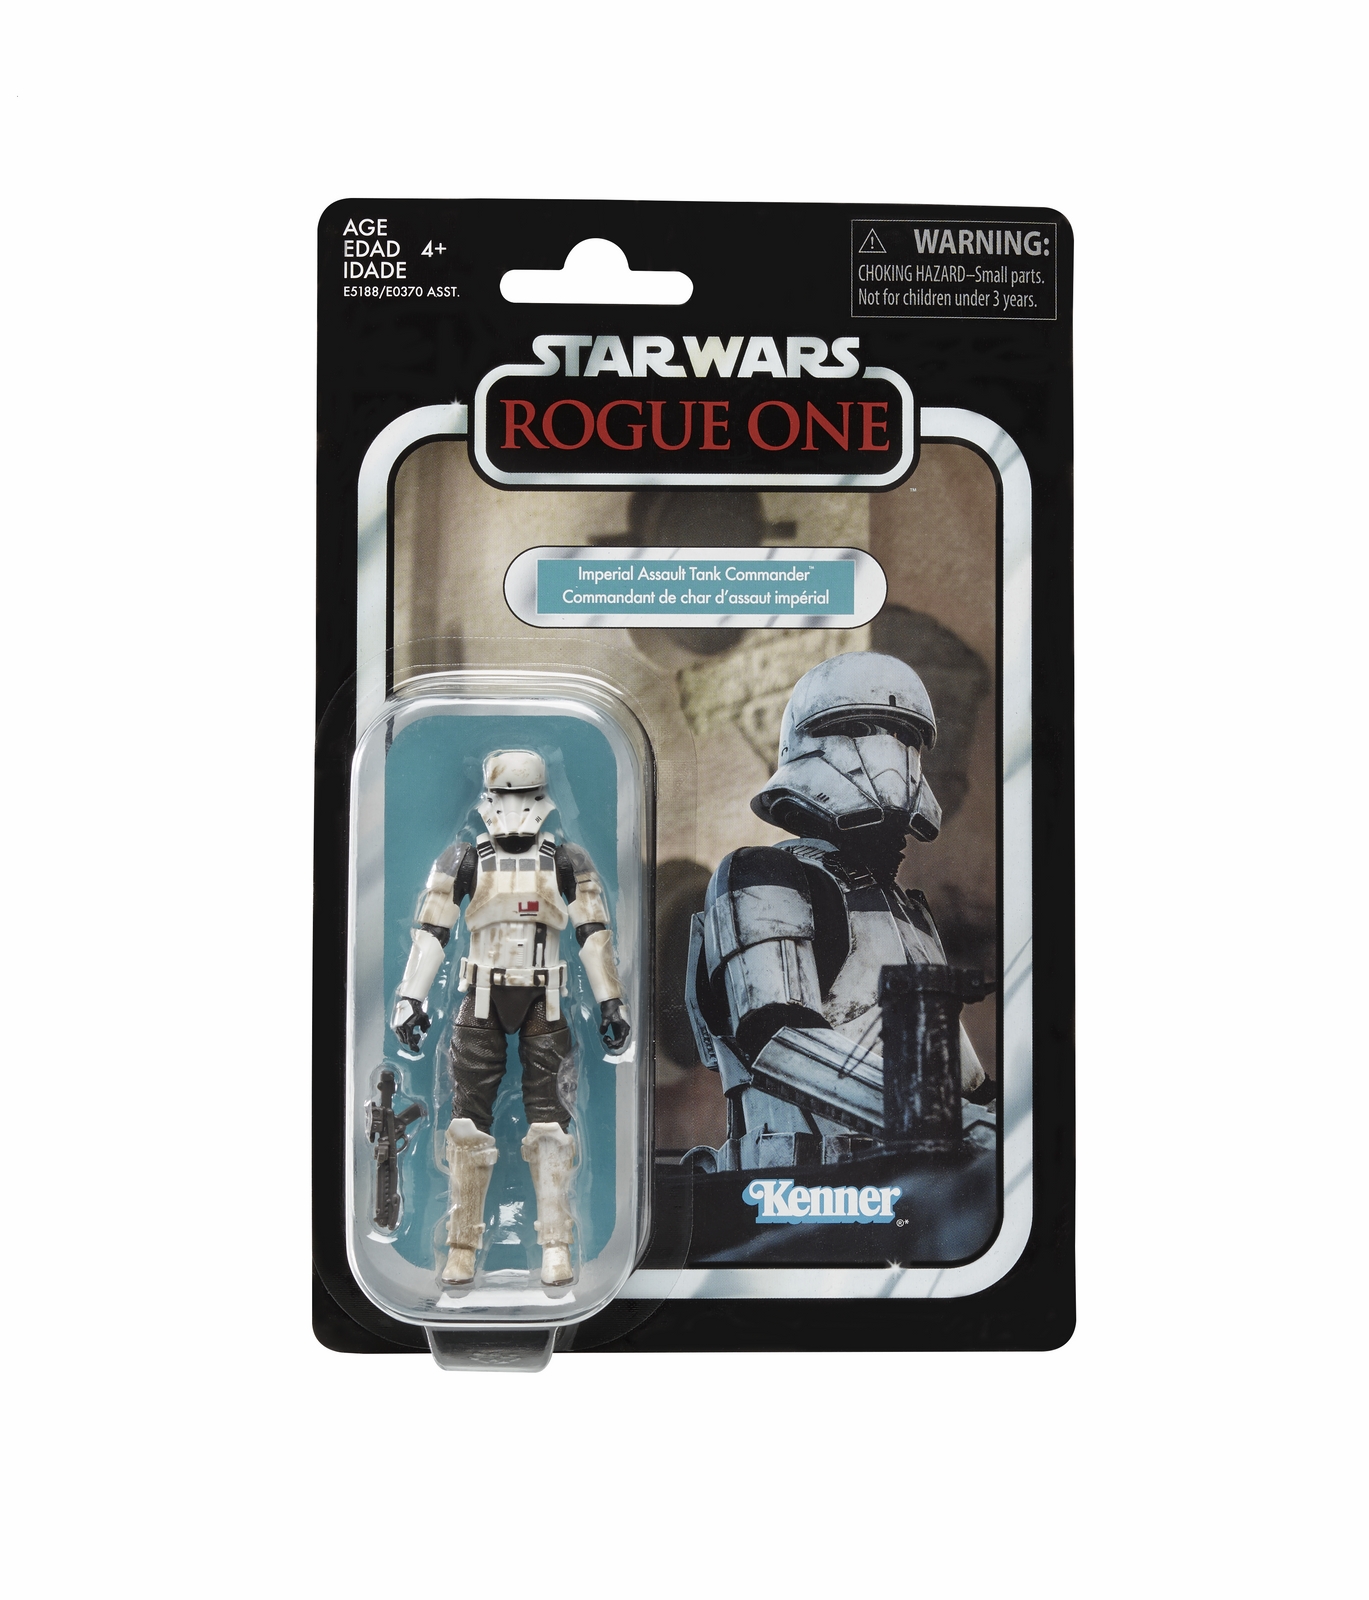 STAR WARS THE VINTAGE COLLECTION 3.75-INCH Figure Assortment - Imperial Assault Tank Commander (in pck 2).jpg